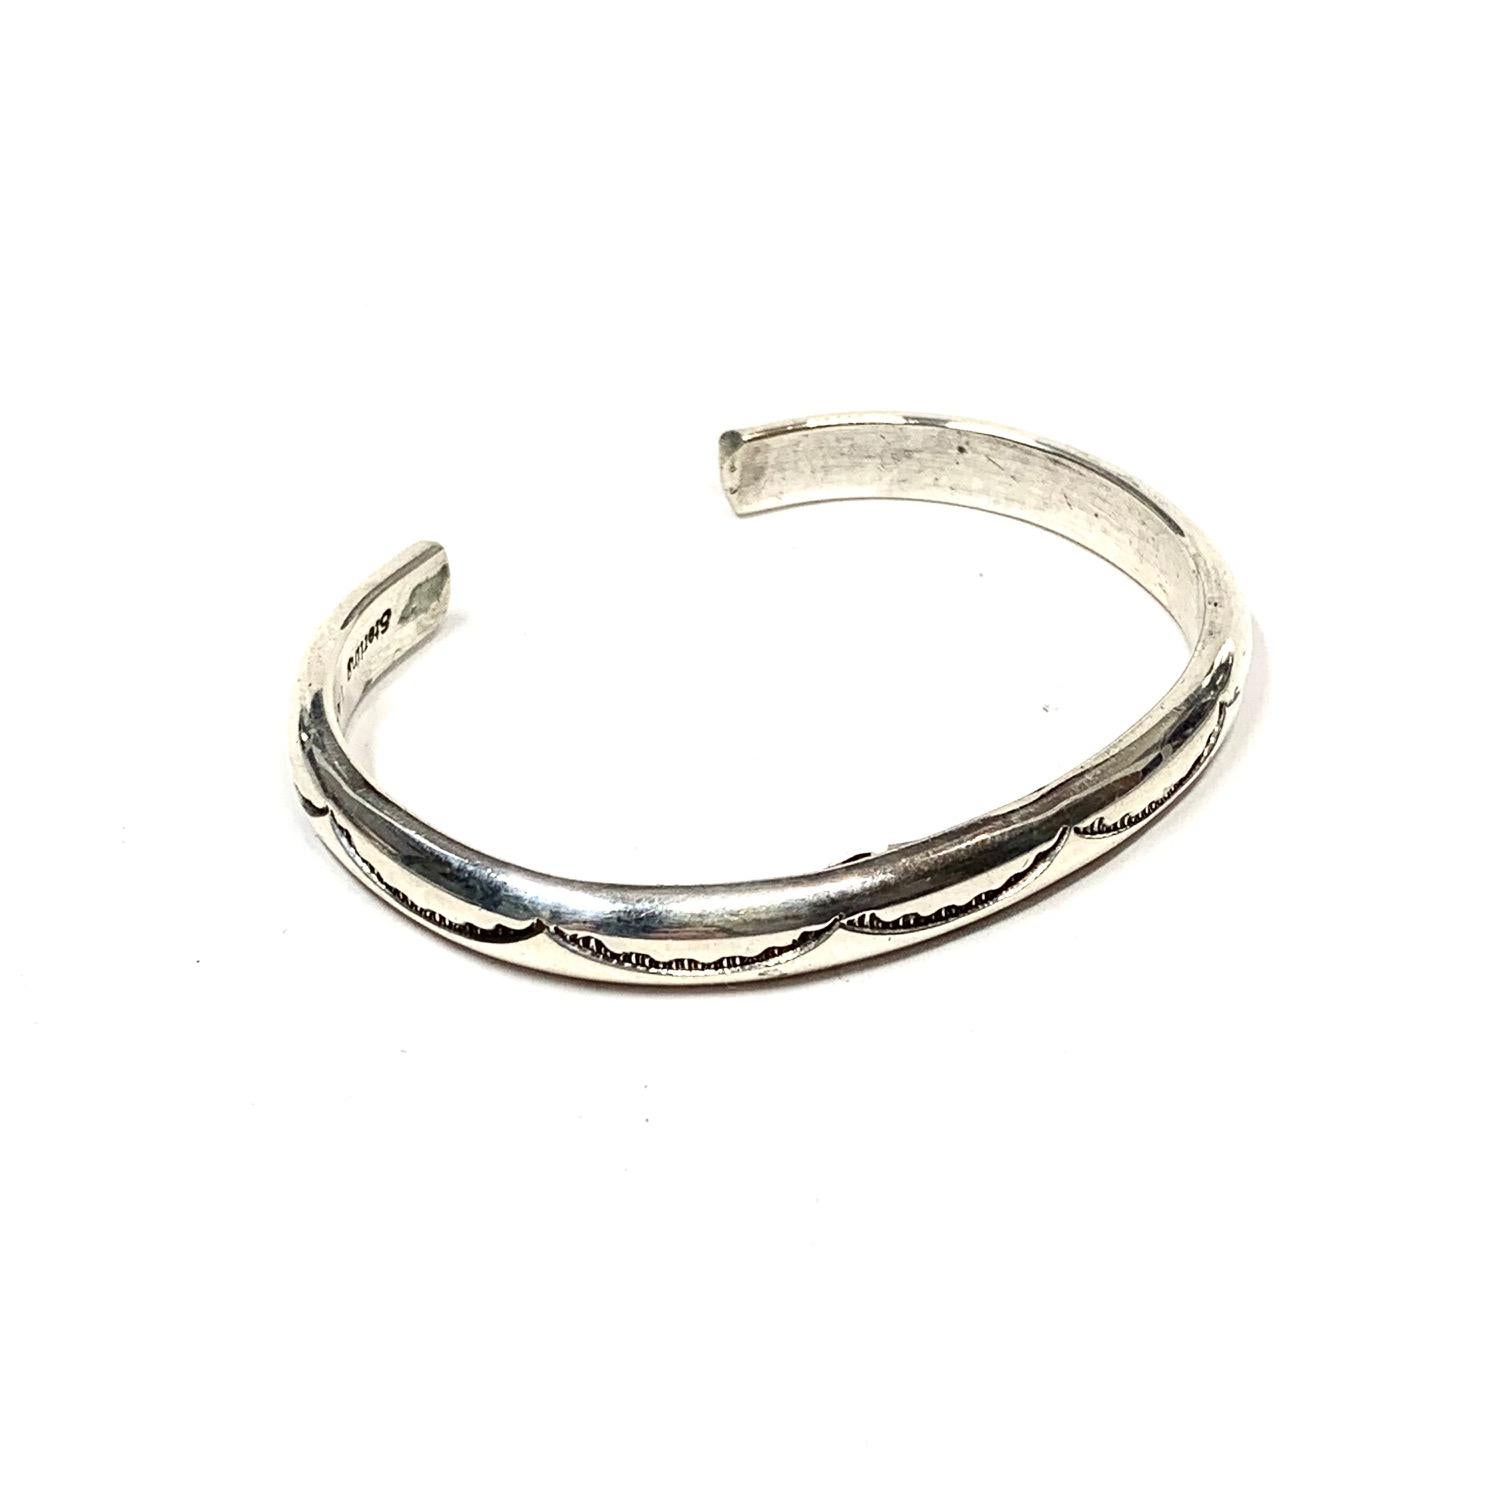 TAHE Navajo Sterling Silver 25 Gr. Cuff Bracelet PS32

TAHE also dedicate time to go simple but elegant look of cuff 25gr. of solid silver measuring 22